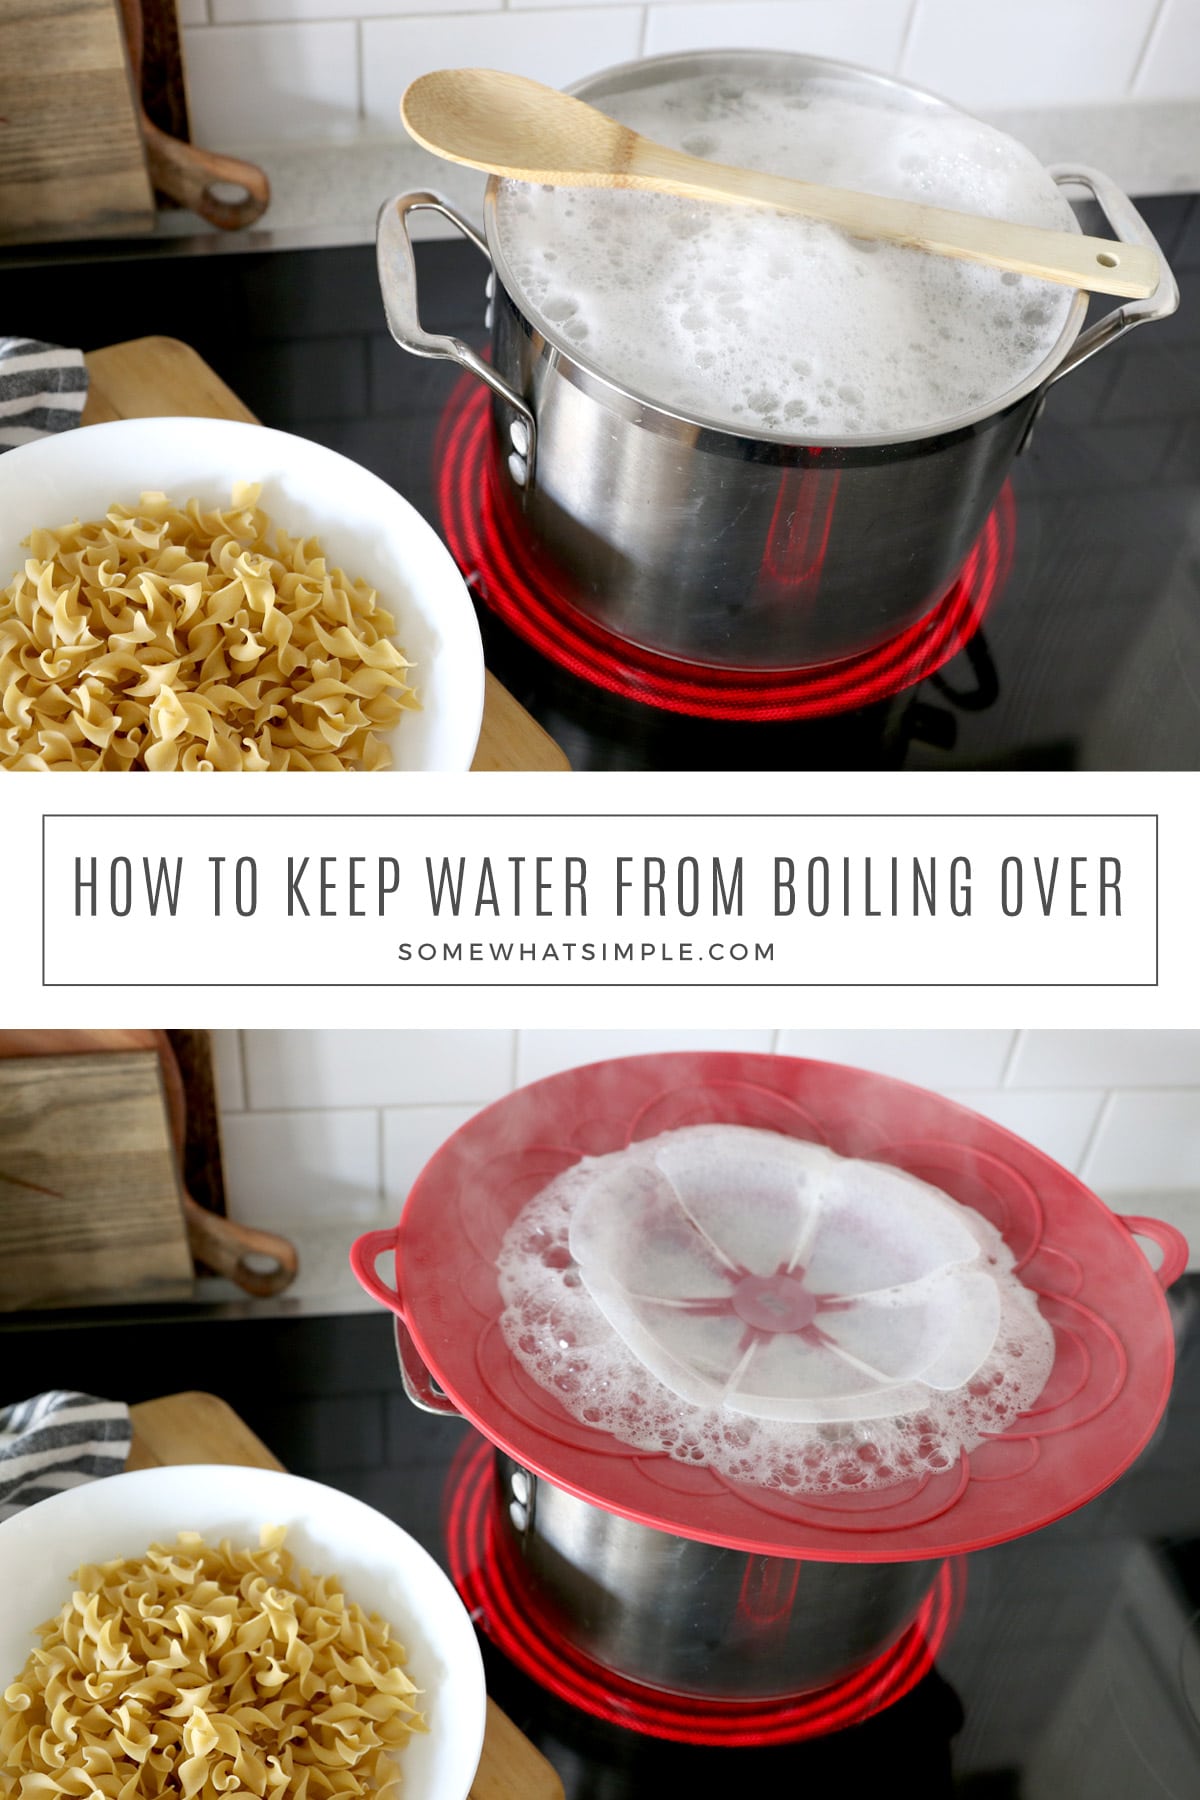 The Brilliant Butter Hack To Prevent Water From Boiling Over